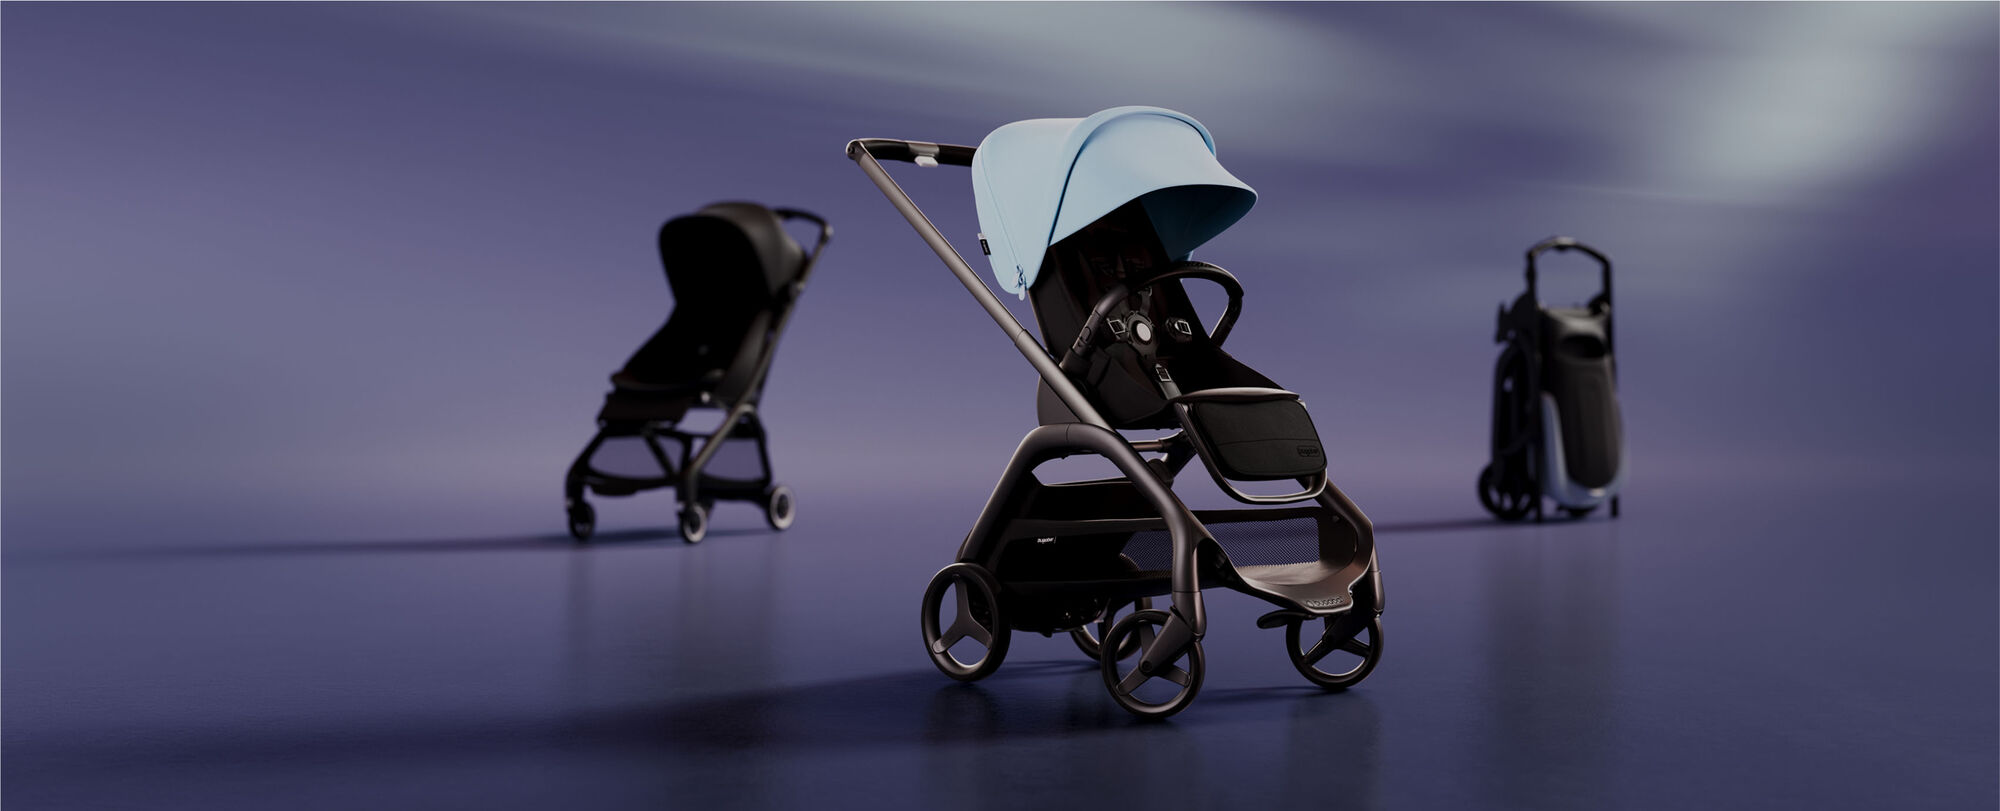 A lineup of 3 prams. At the front is a Bugaboo Dragonfly with Skyline Blue sun canopy. On the left is a Bugaboo Butterfly with Midnight Black fabrics. On the right is a self-standing folded Bugaboo Dragonfly.